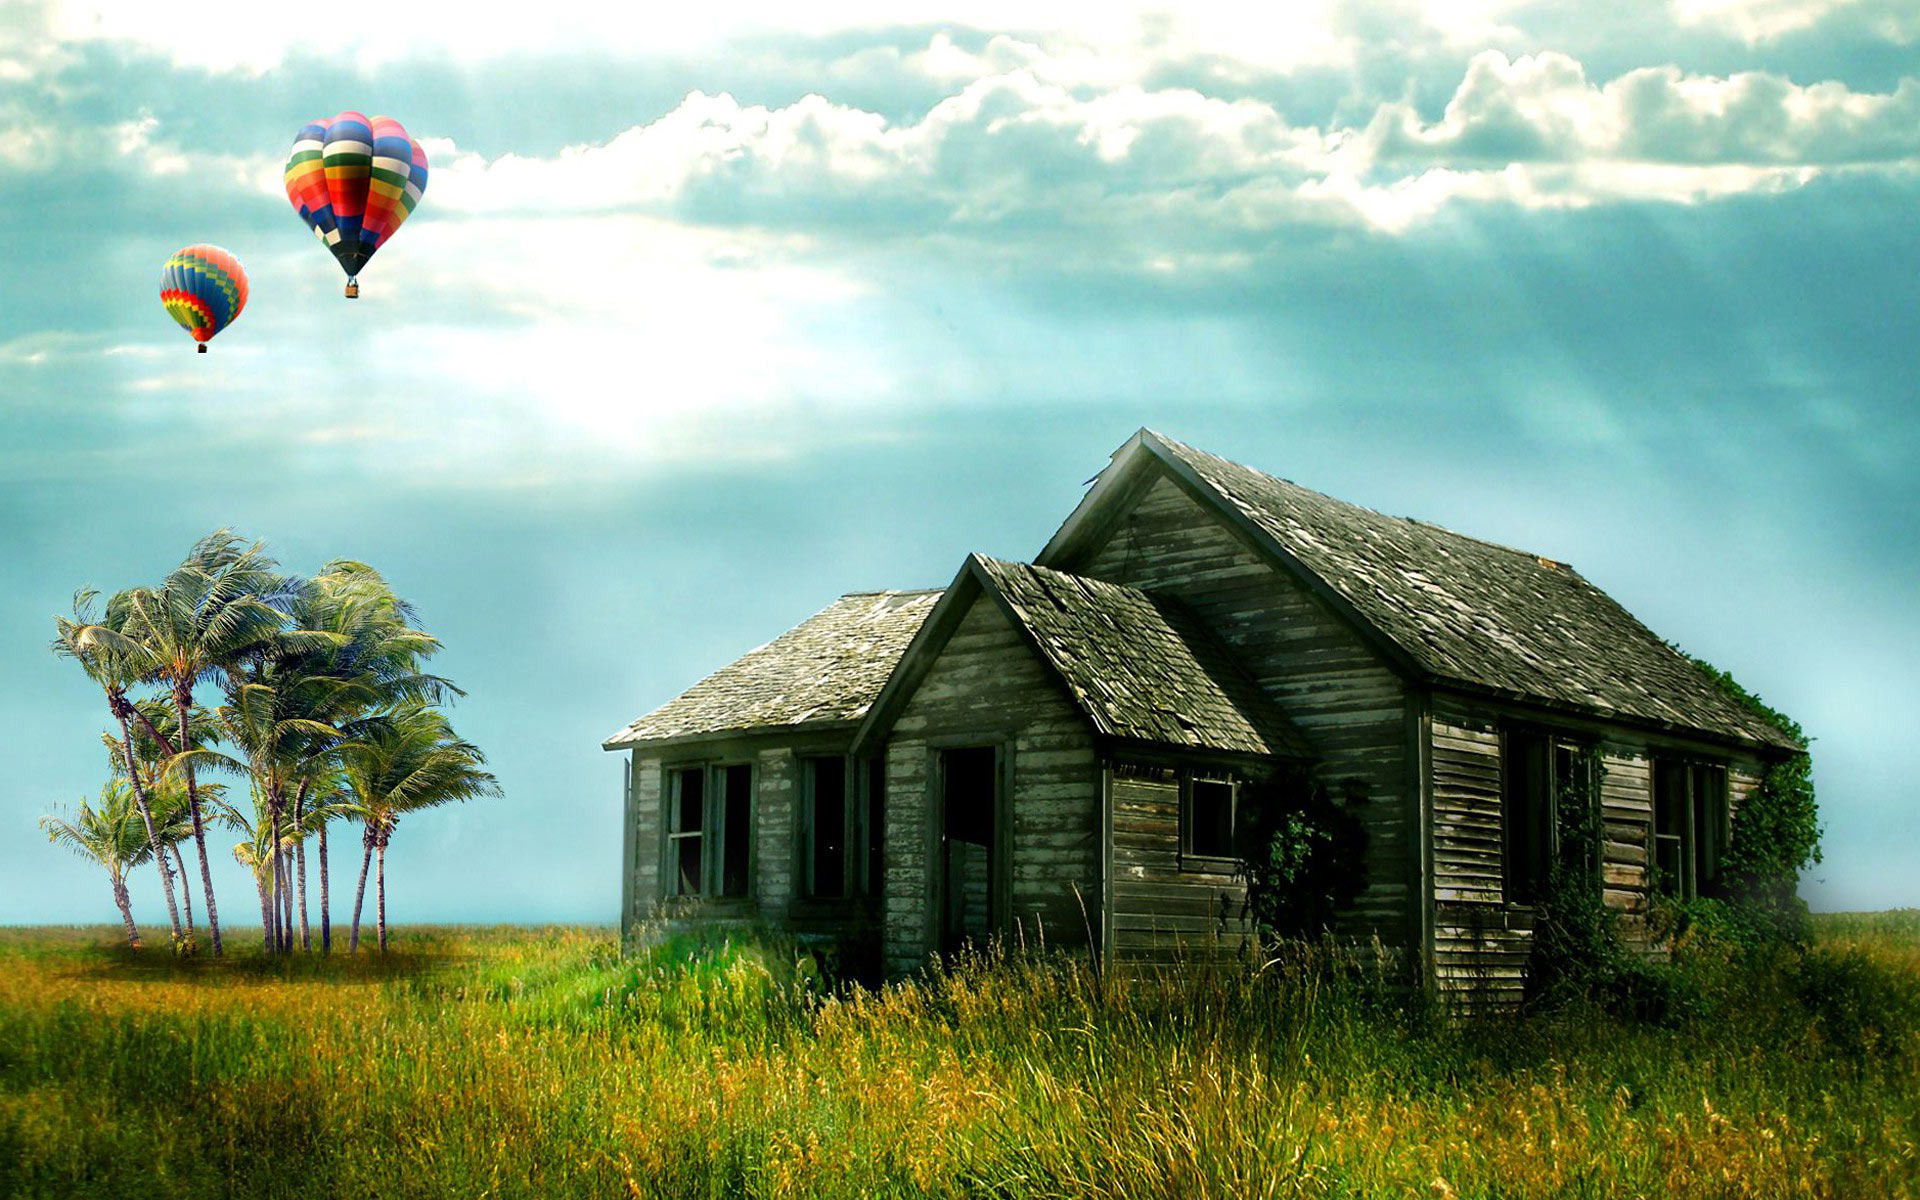 Old house and balloons on the field wallpaper   83890